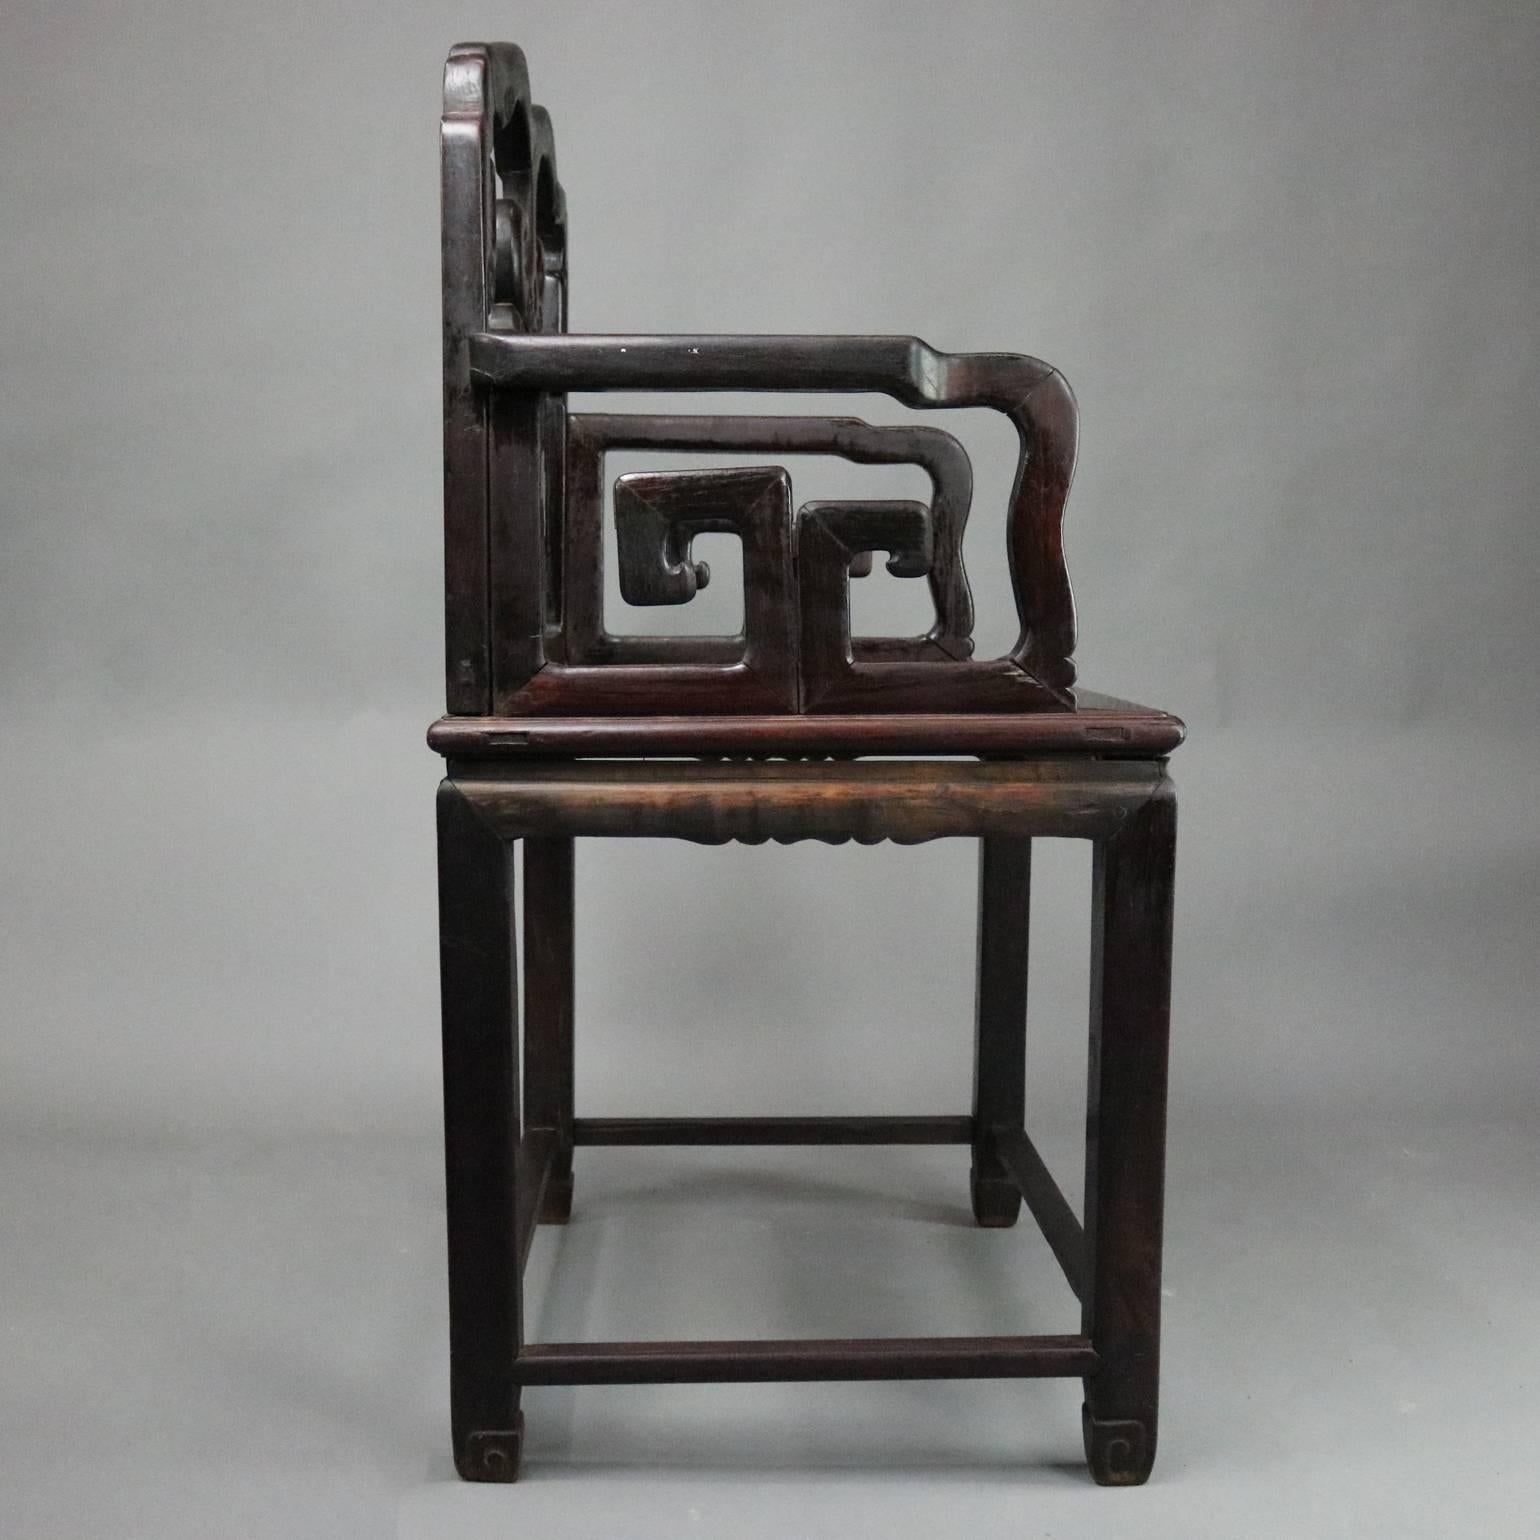 Lacquered Antique Chinese Ebonized Carved Hardwood Throne Armchair, circa 1890